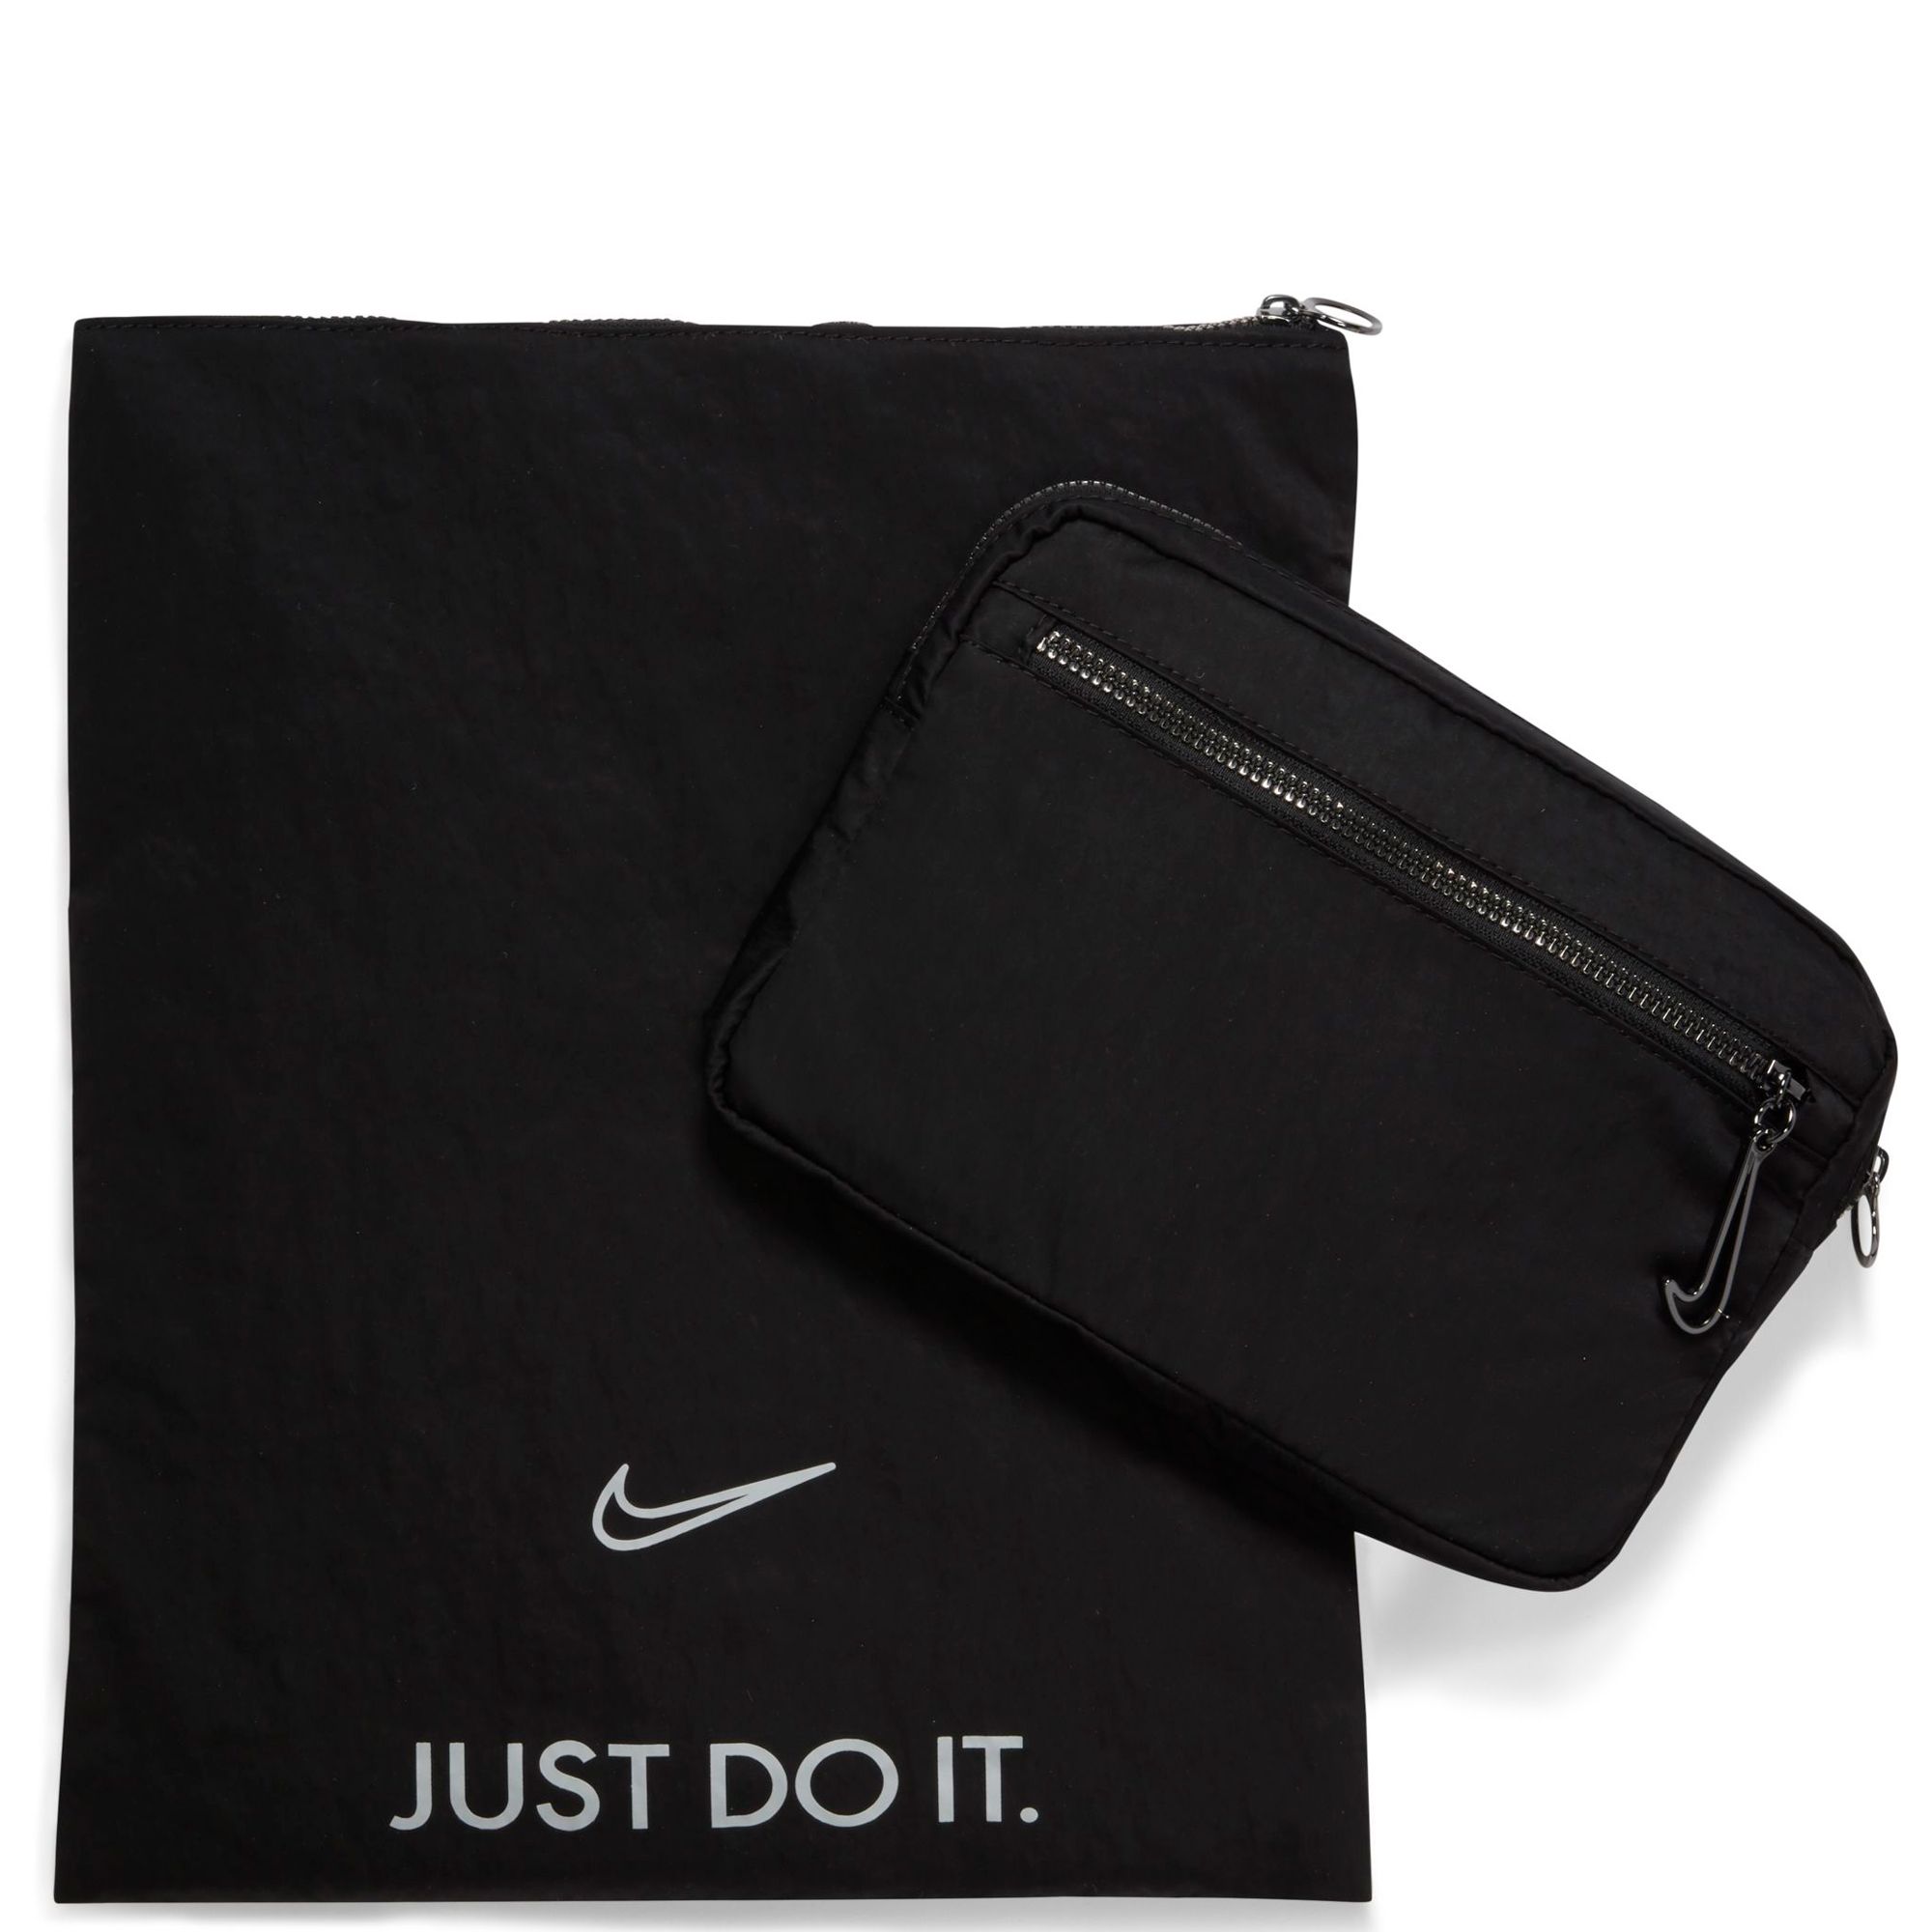 Women's Nike One Luxe Training Bag Stone Black Fitness Gym Tote  CV0058-010 NEW